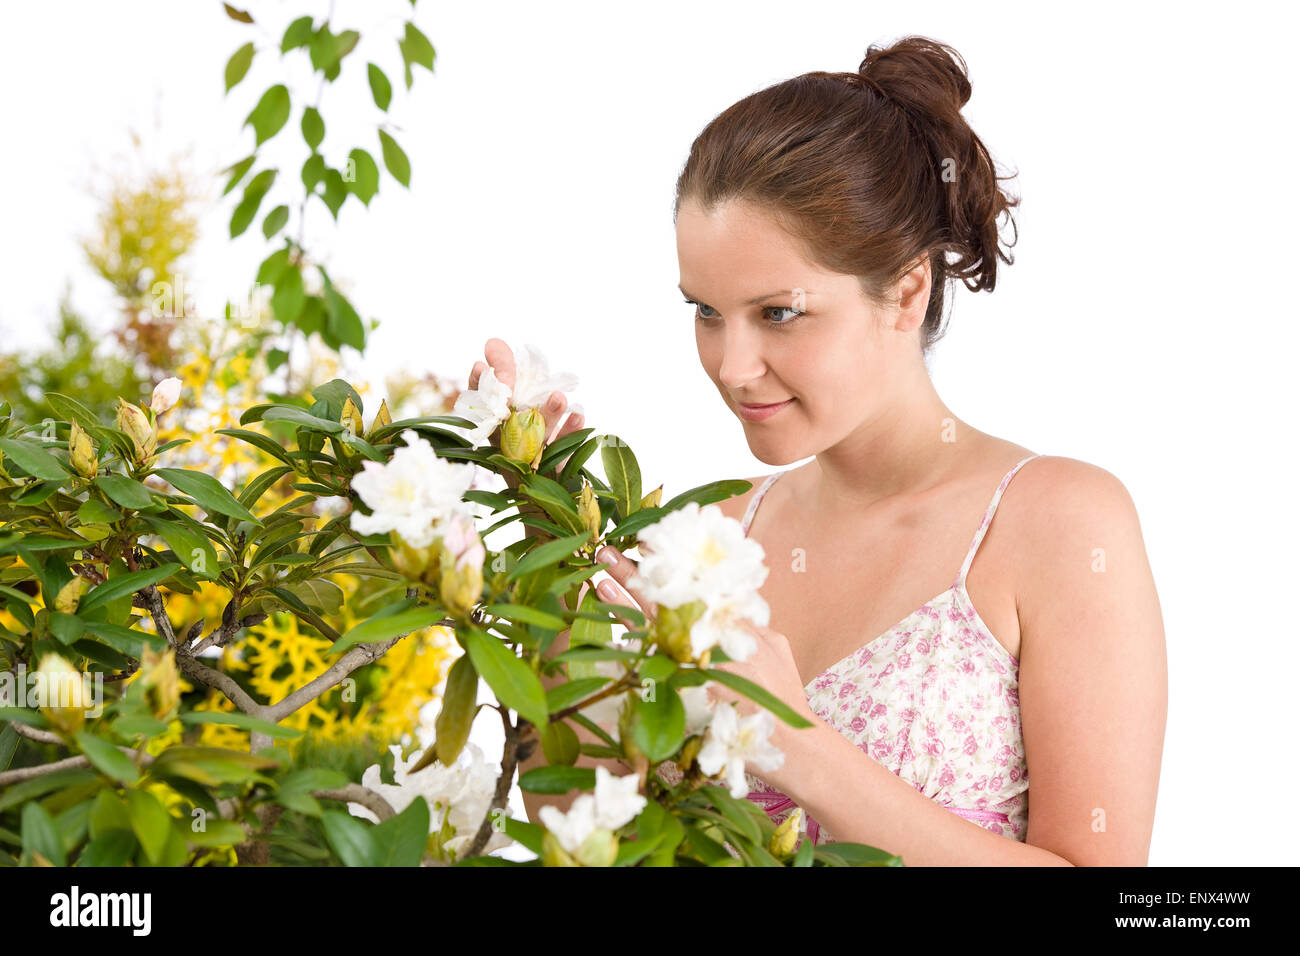 Gardening - Woman with Rhododendron flower blossom Stock Photo